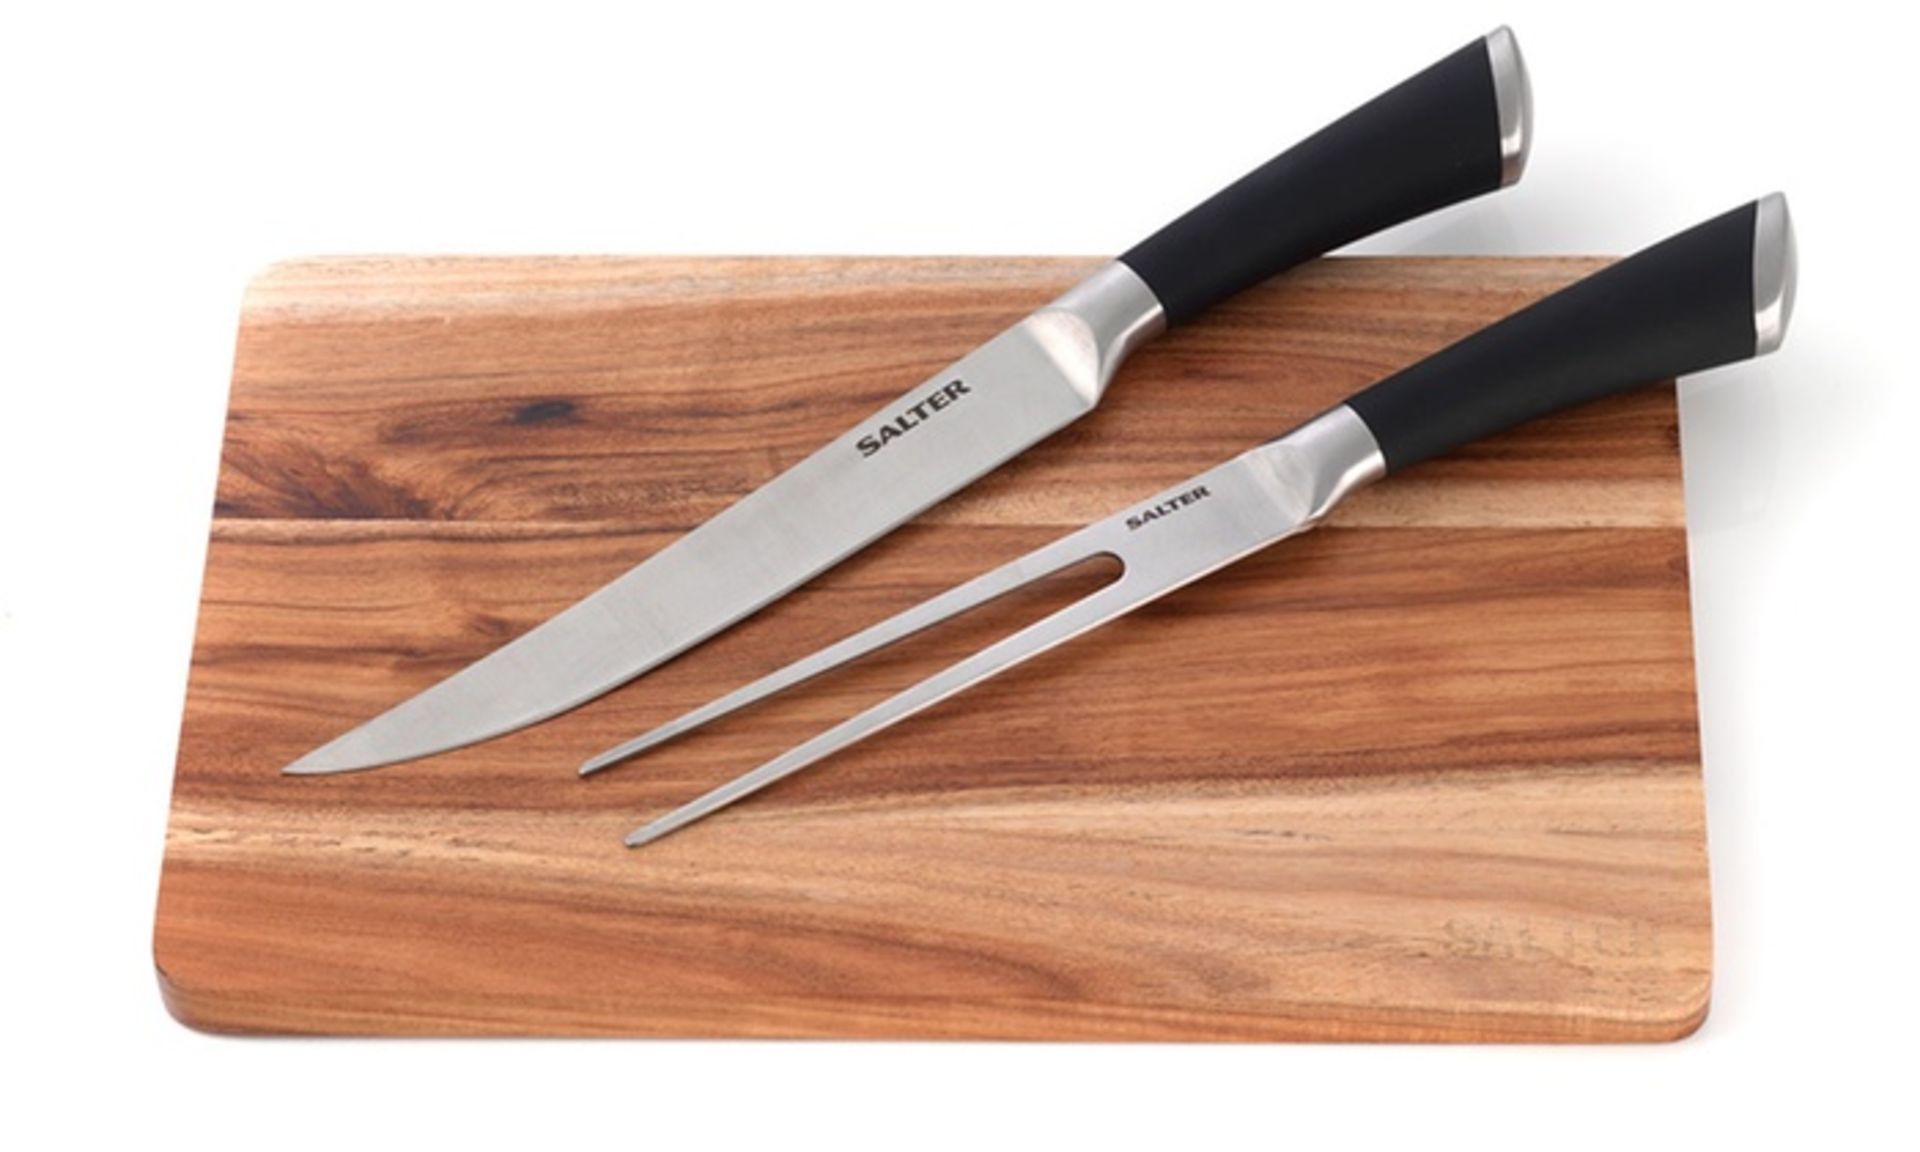 V Brand New Salter Elegance 2 Piece Carving Set With Chopping Board Littlewoods Price £29.99 X 2